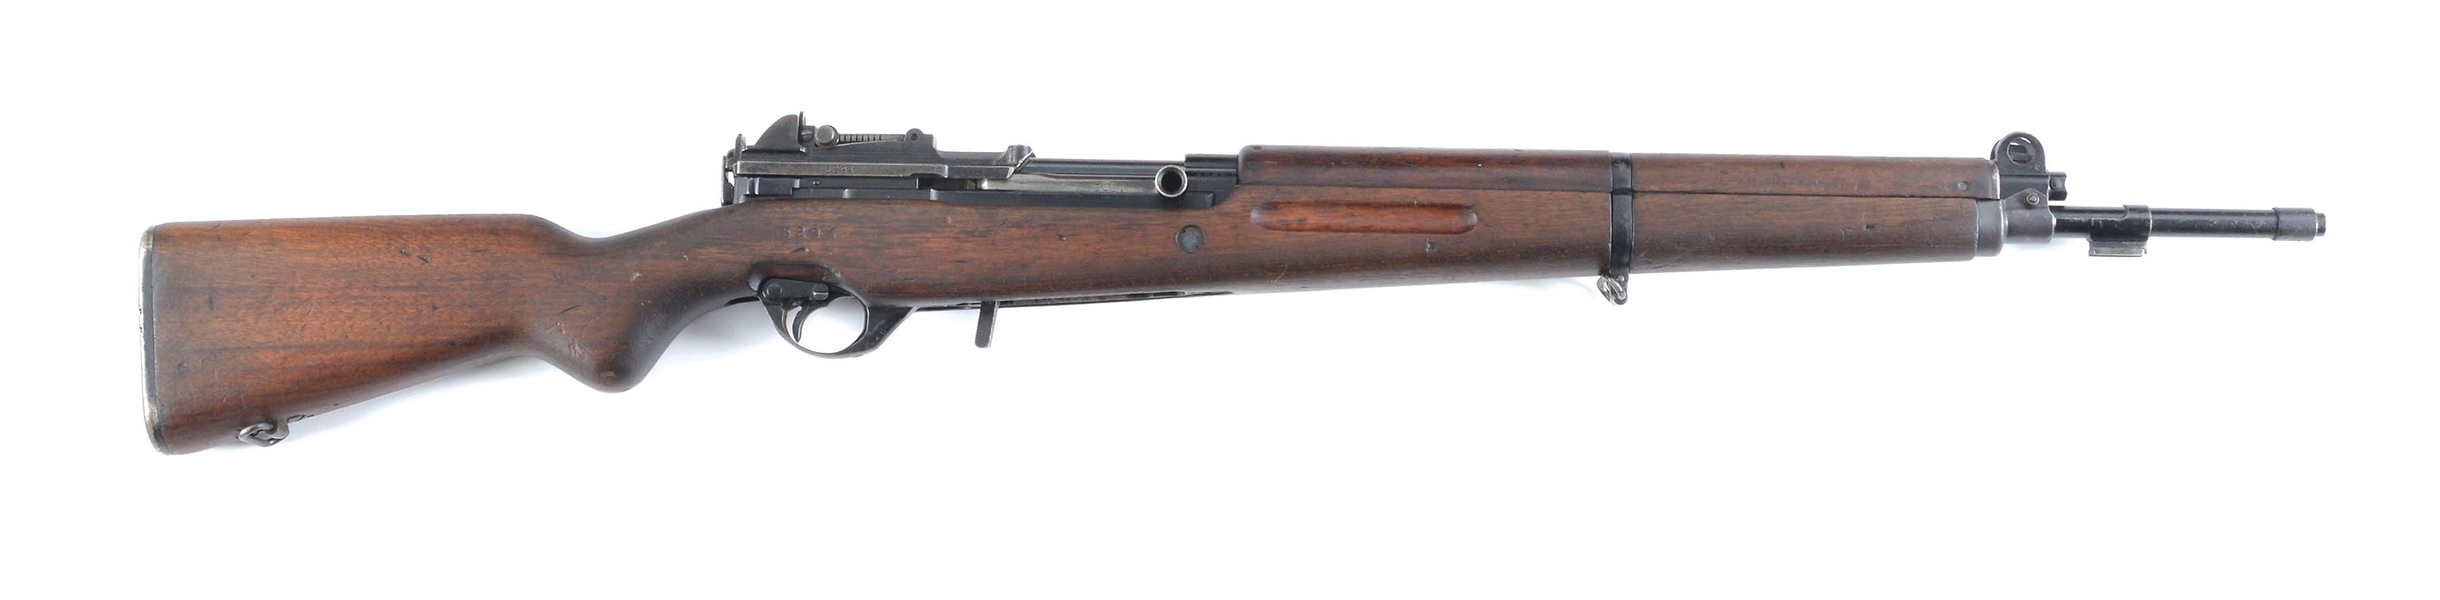 (C) FABRIQUE NATIONALE ARGENTINE NAVY CONTRACT FN-49 SEMI AUTOMATIC MILITARY RIFLE.